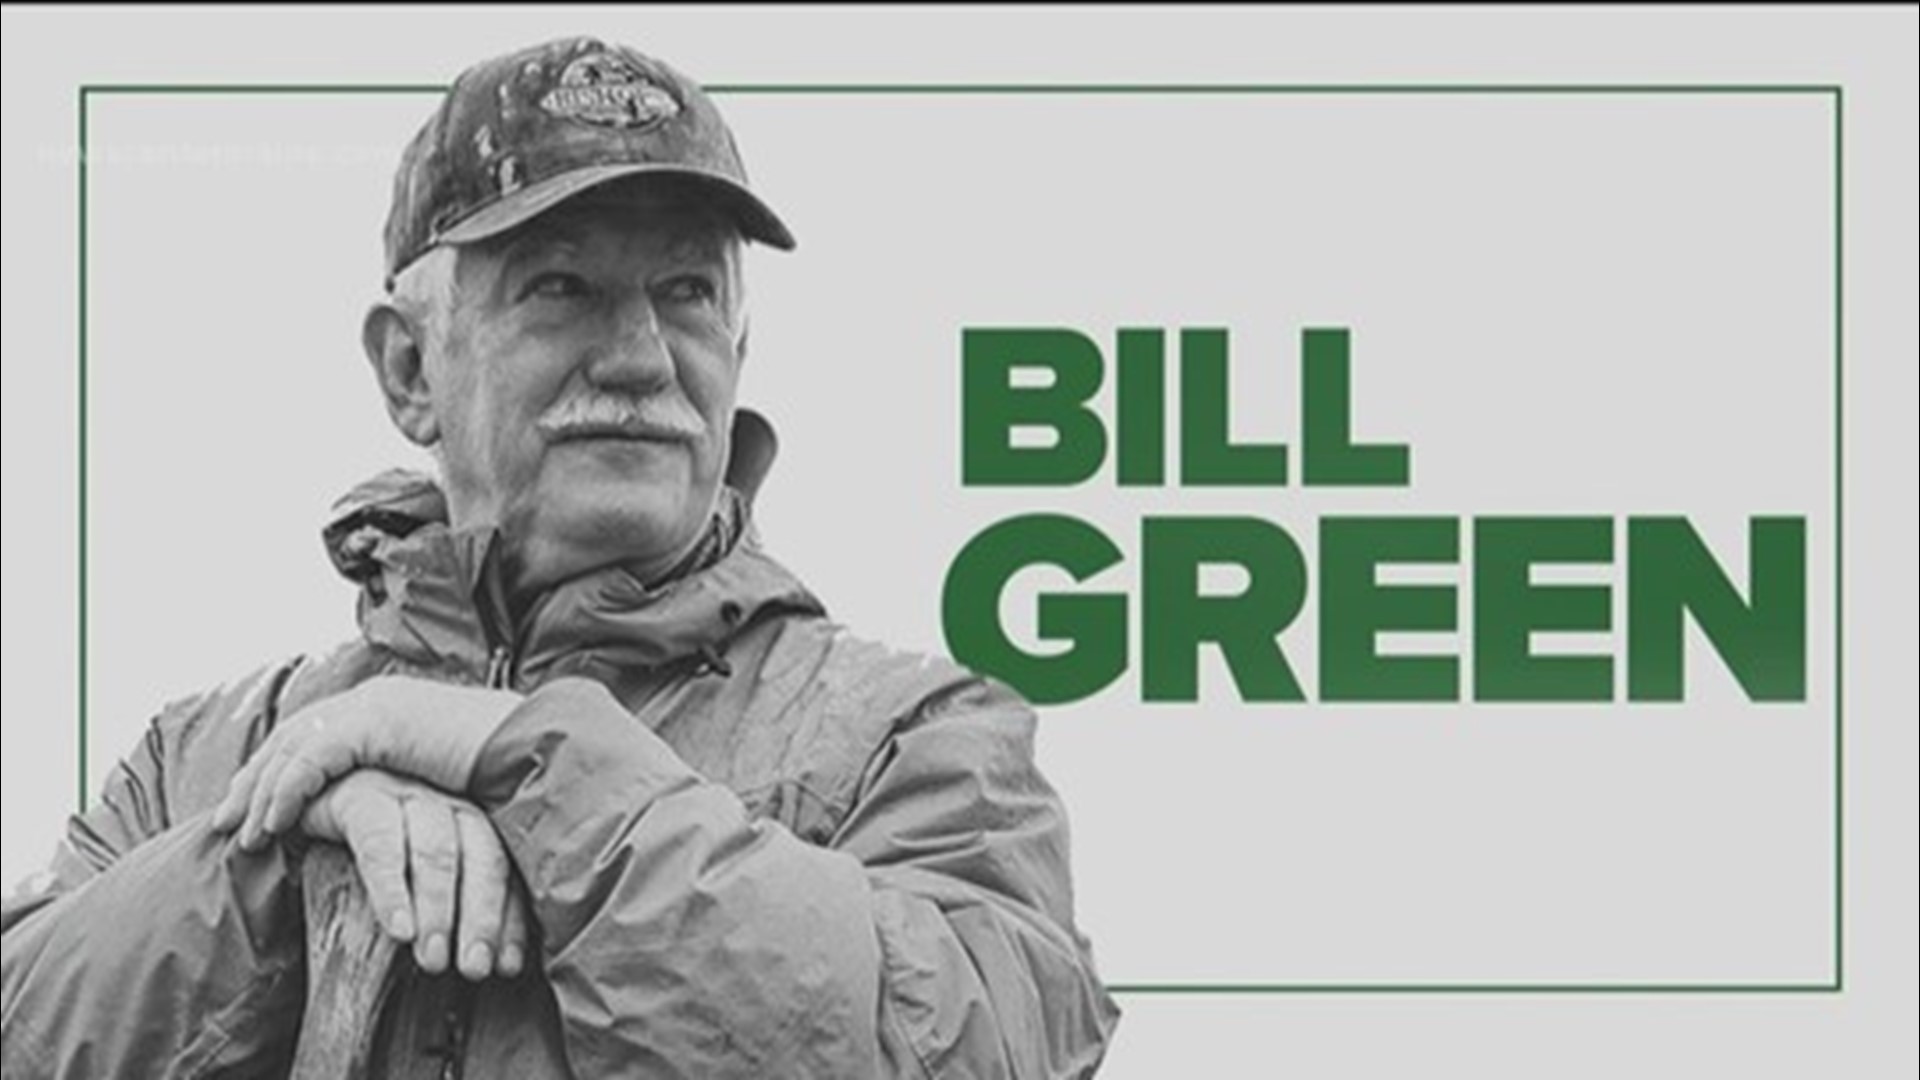 "Bill Green’s Maine" is a journey through Maine towns, big and small, filled with interesting tales of the people who make the Pine Tree State unique and inviting.